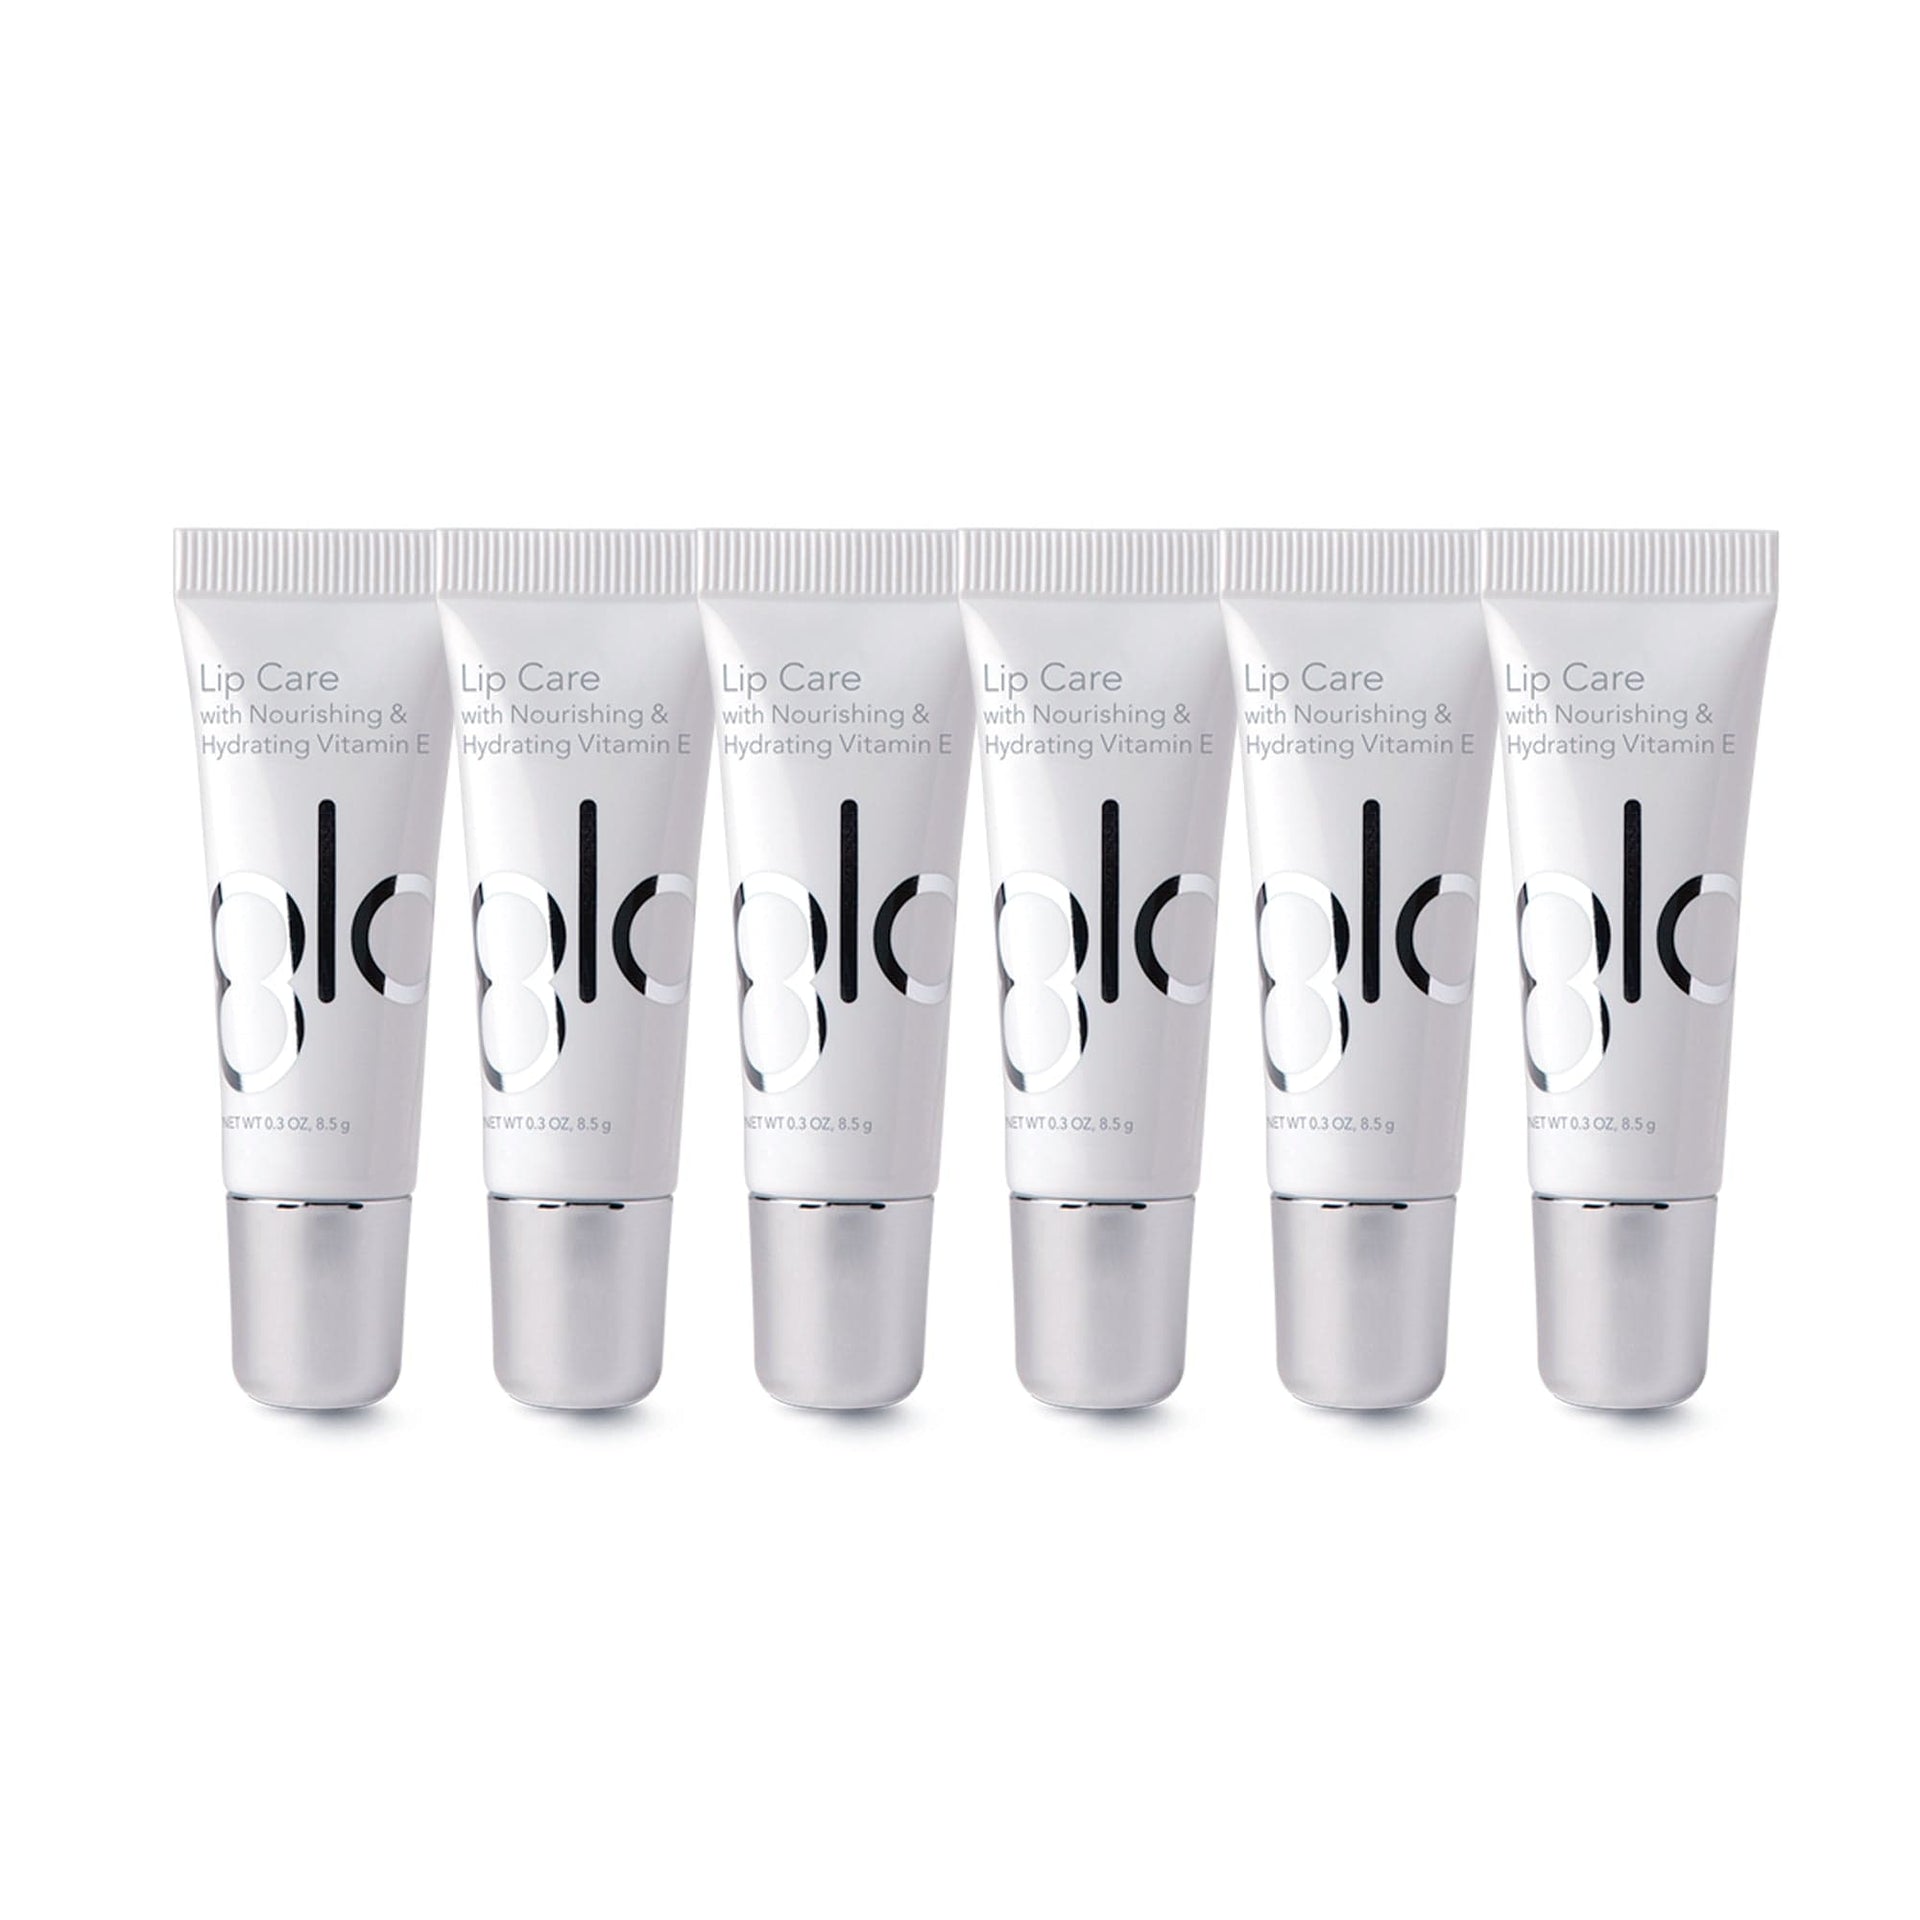 Lip Care Pack of 6